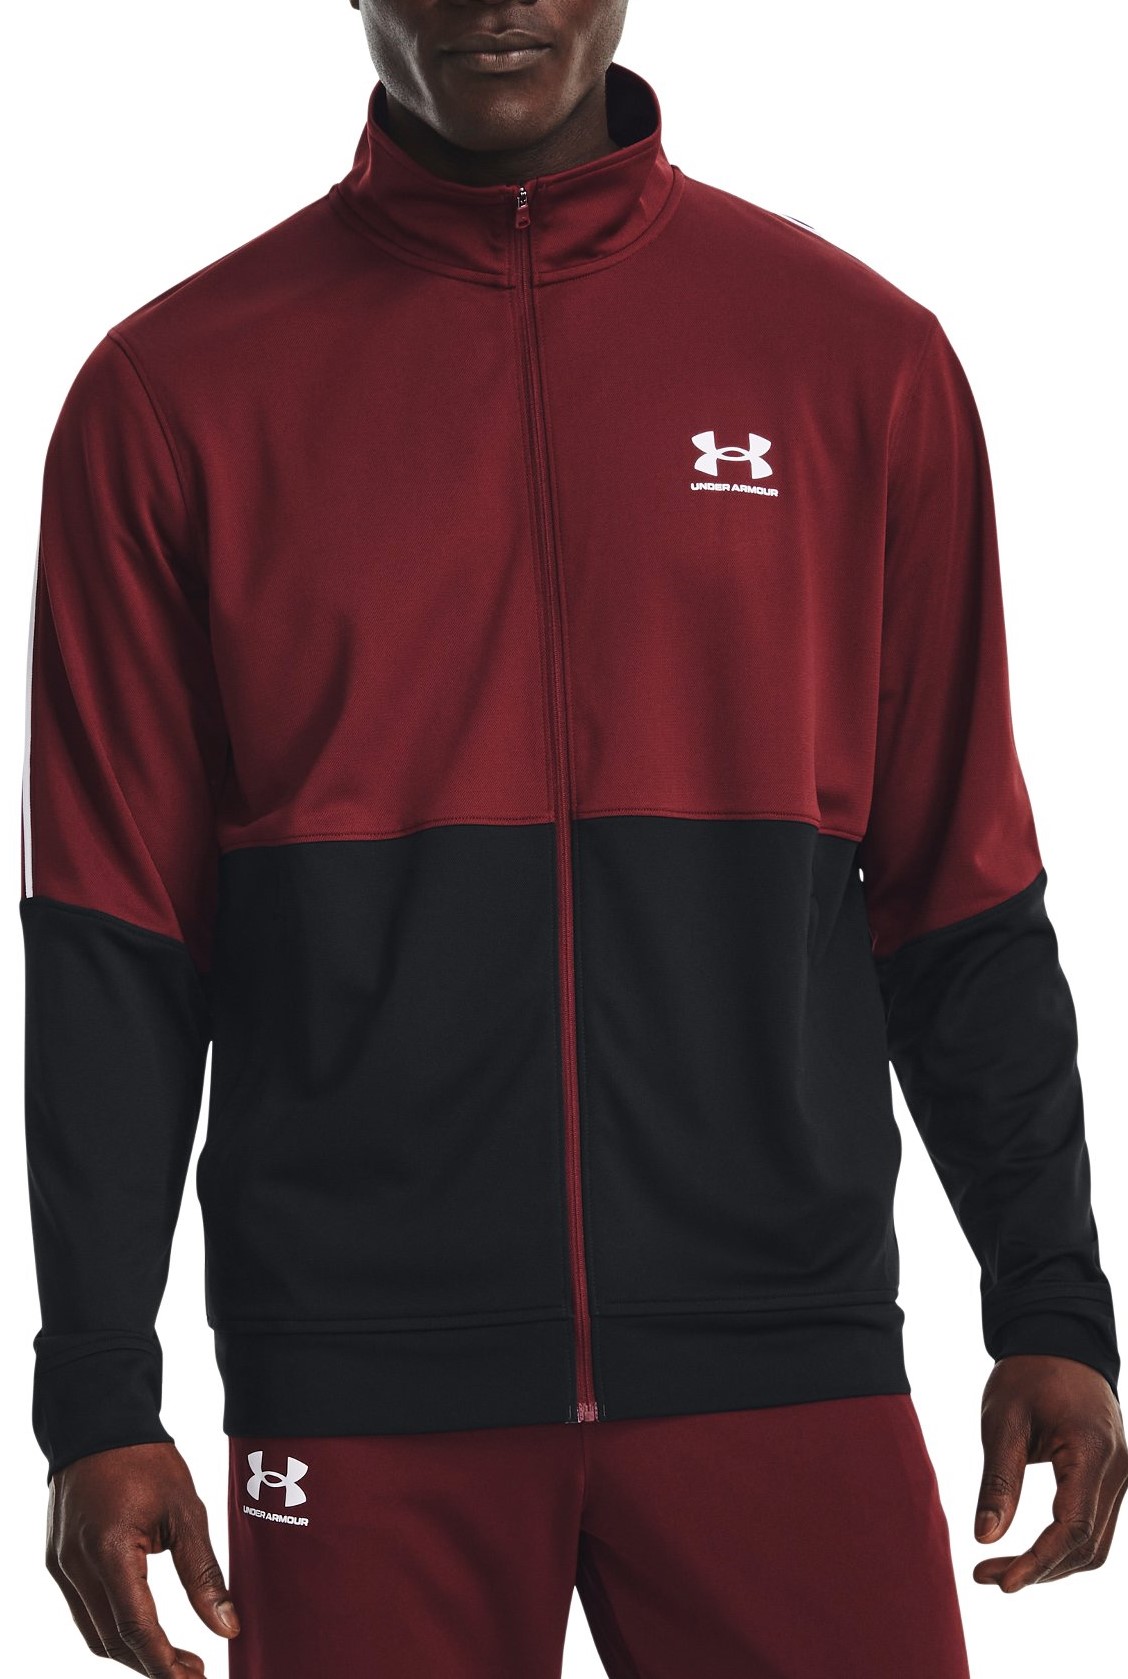 Under Armour cnger ii knit warm-up